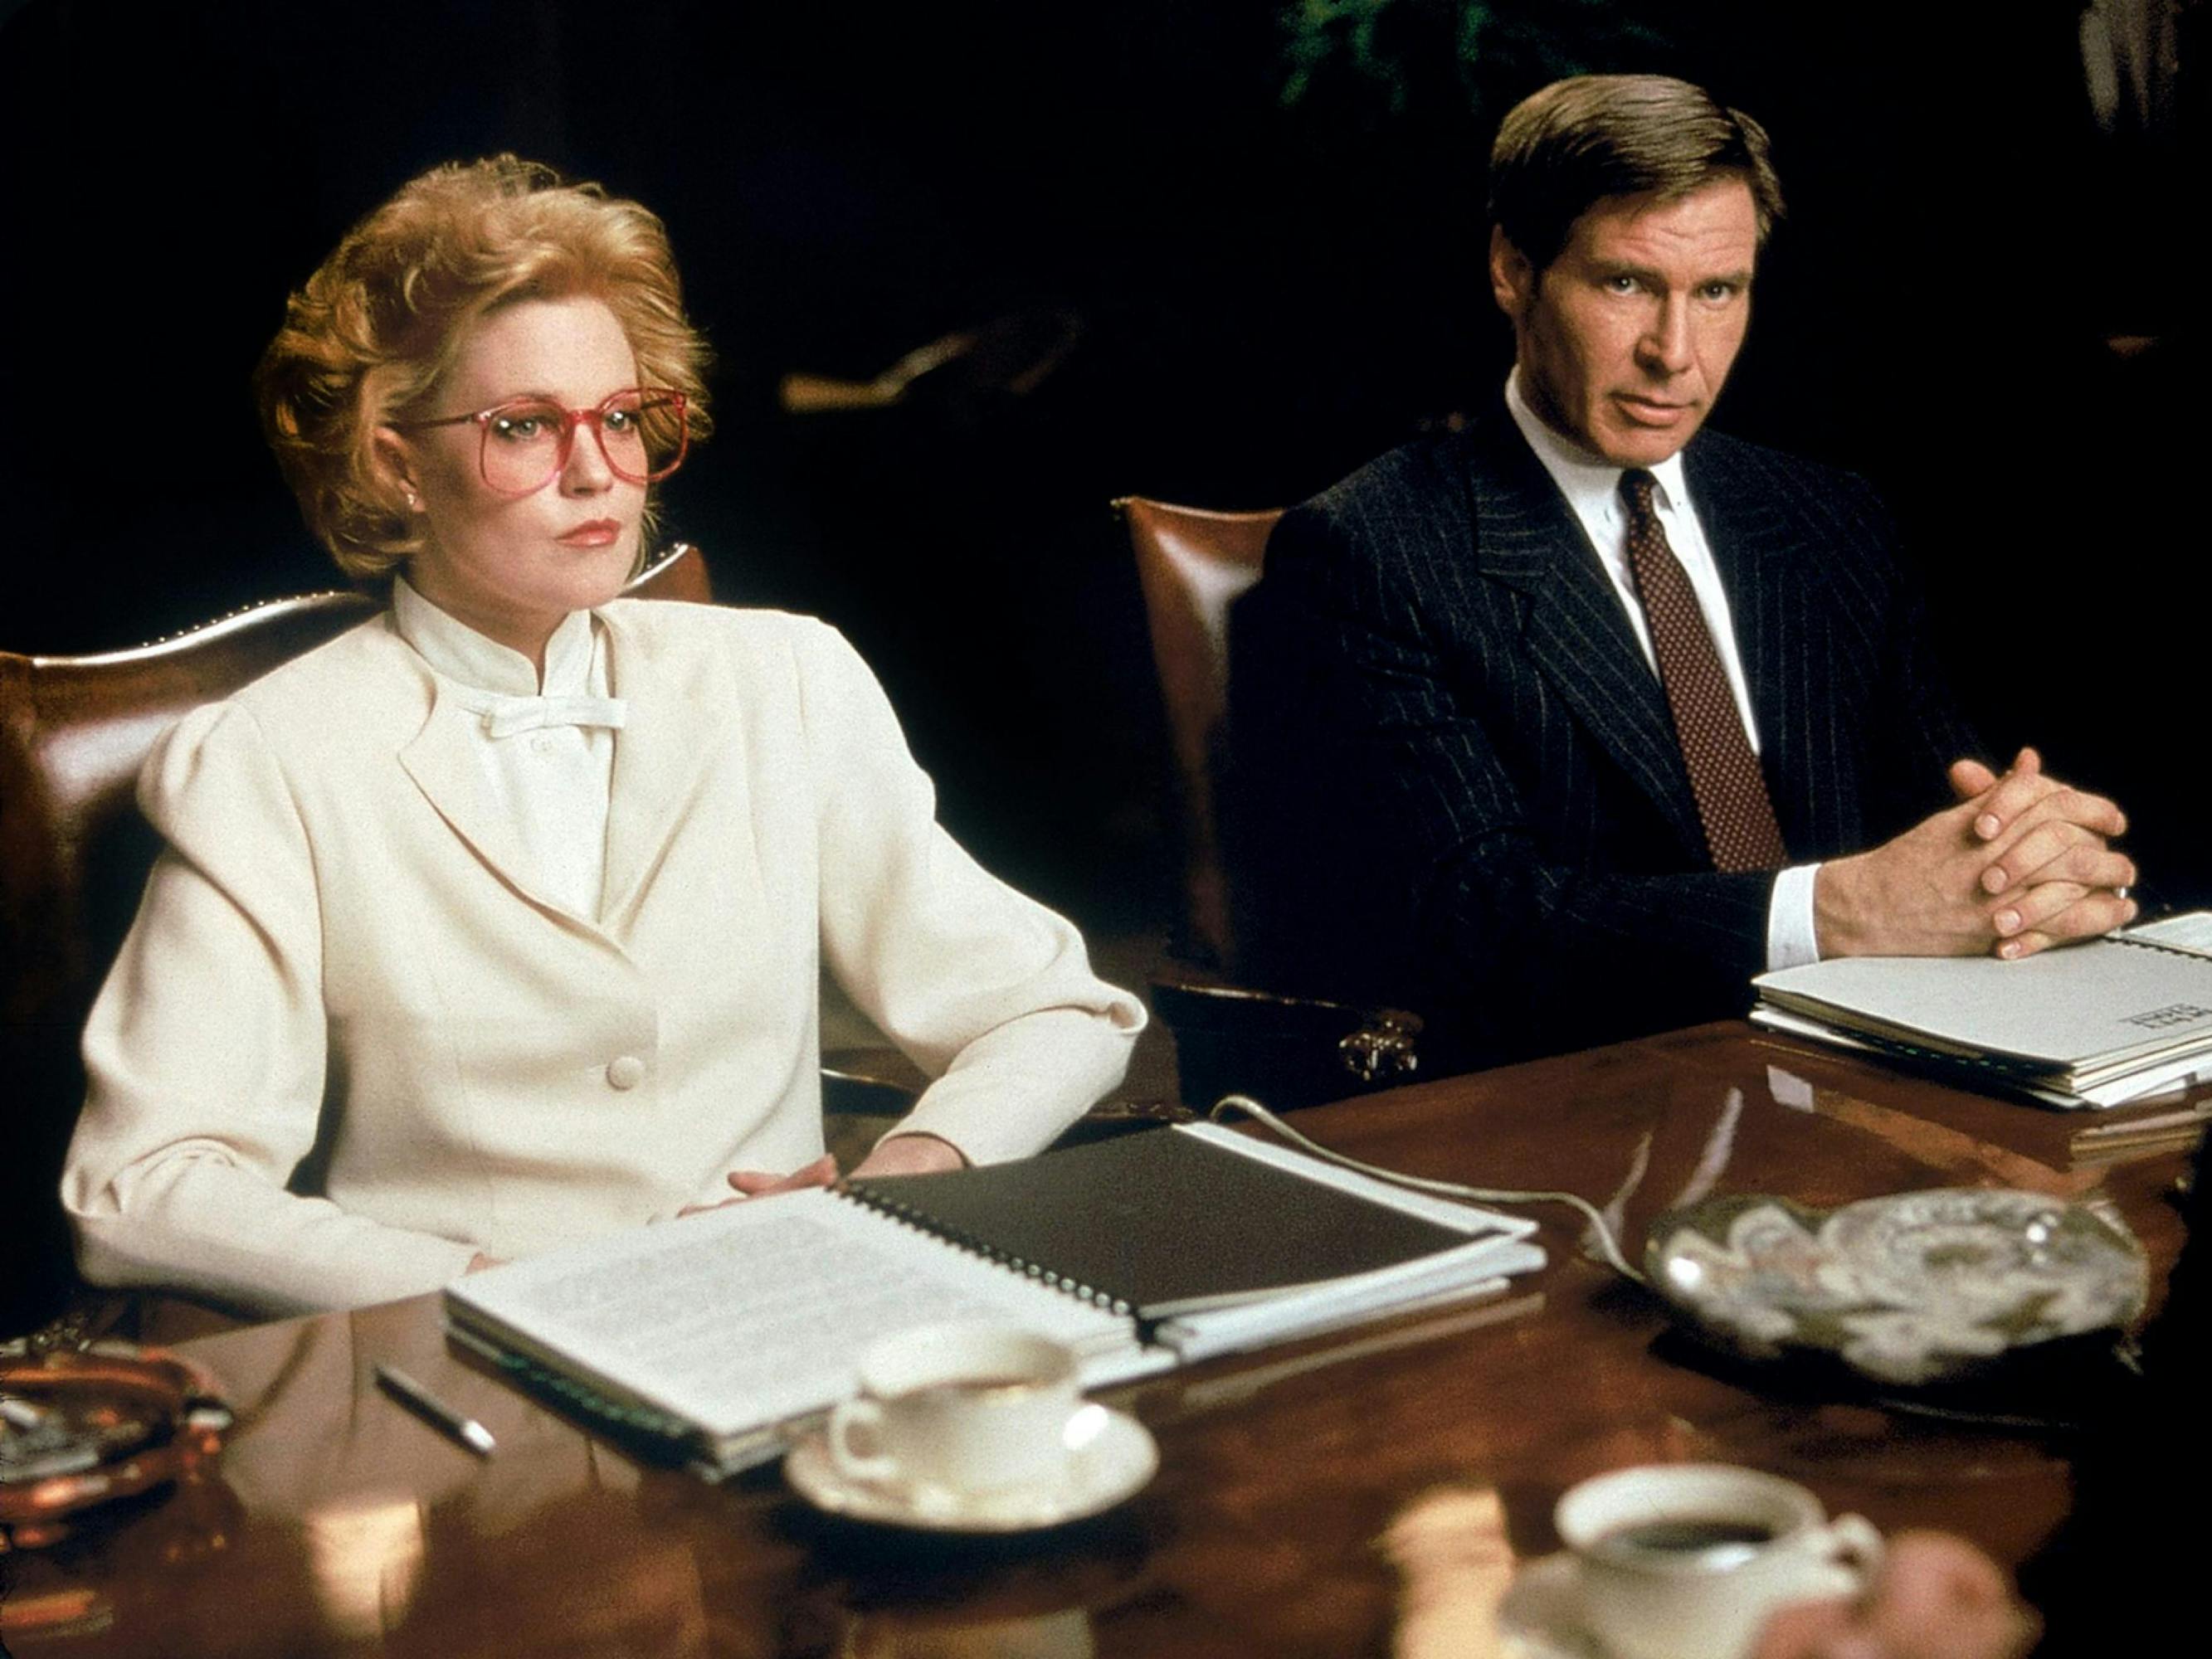 Melanie Griffith and Harrison Ford sit at a table with paperwork sitting in front of them. Griffith has on an all-white suit and red-framed glasses. 